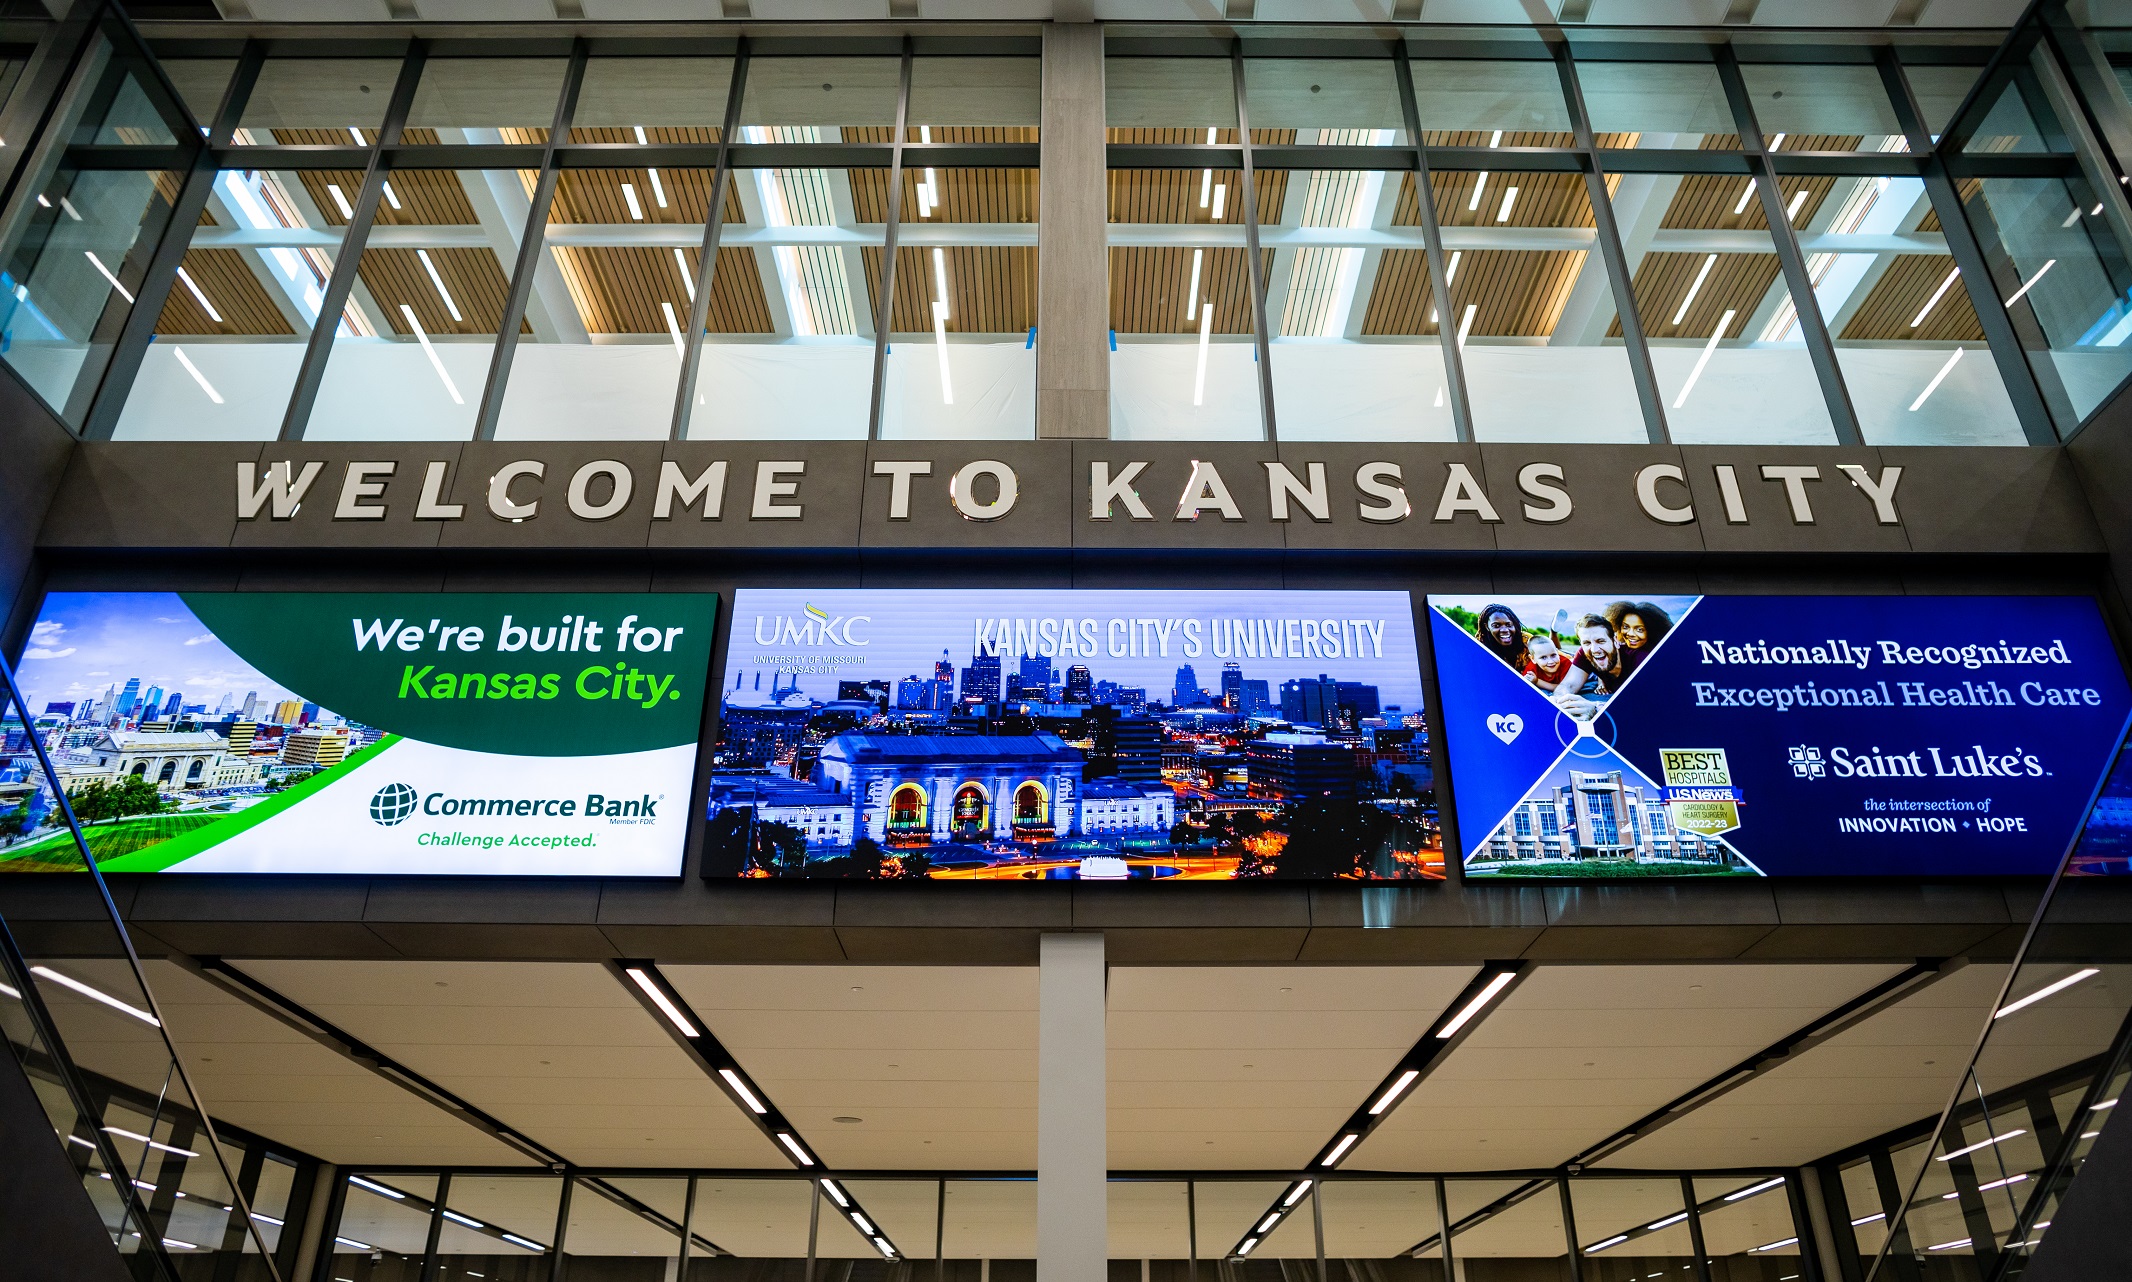 Welcome sign in airport featuring UMKC.